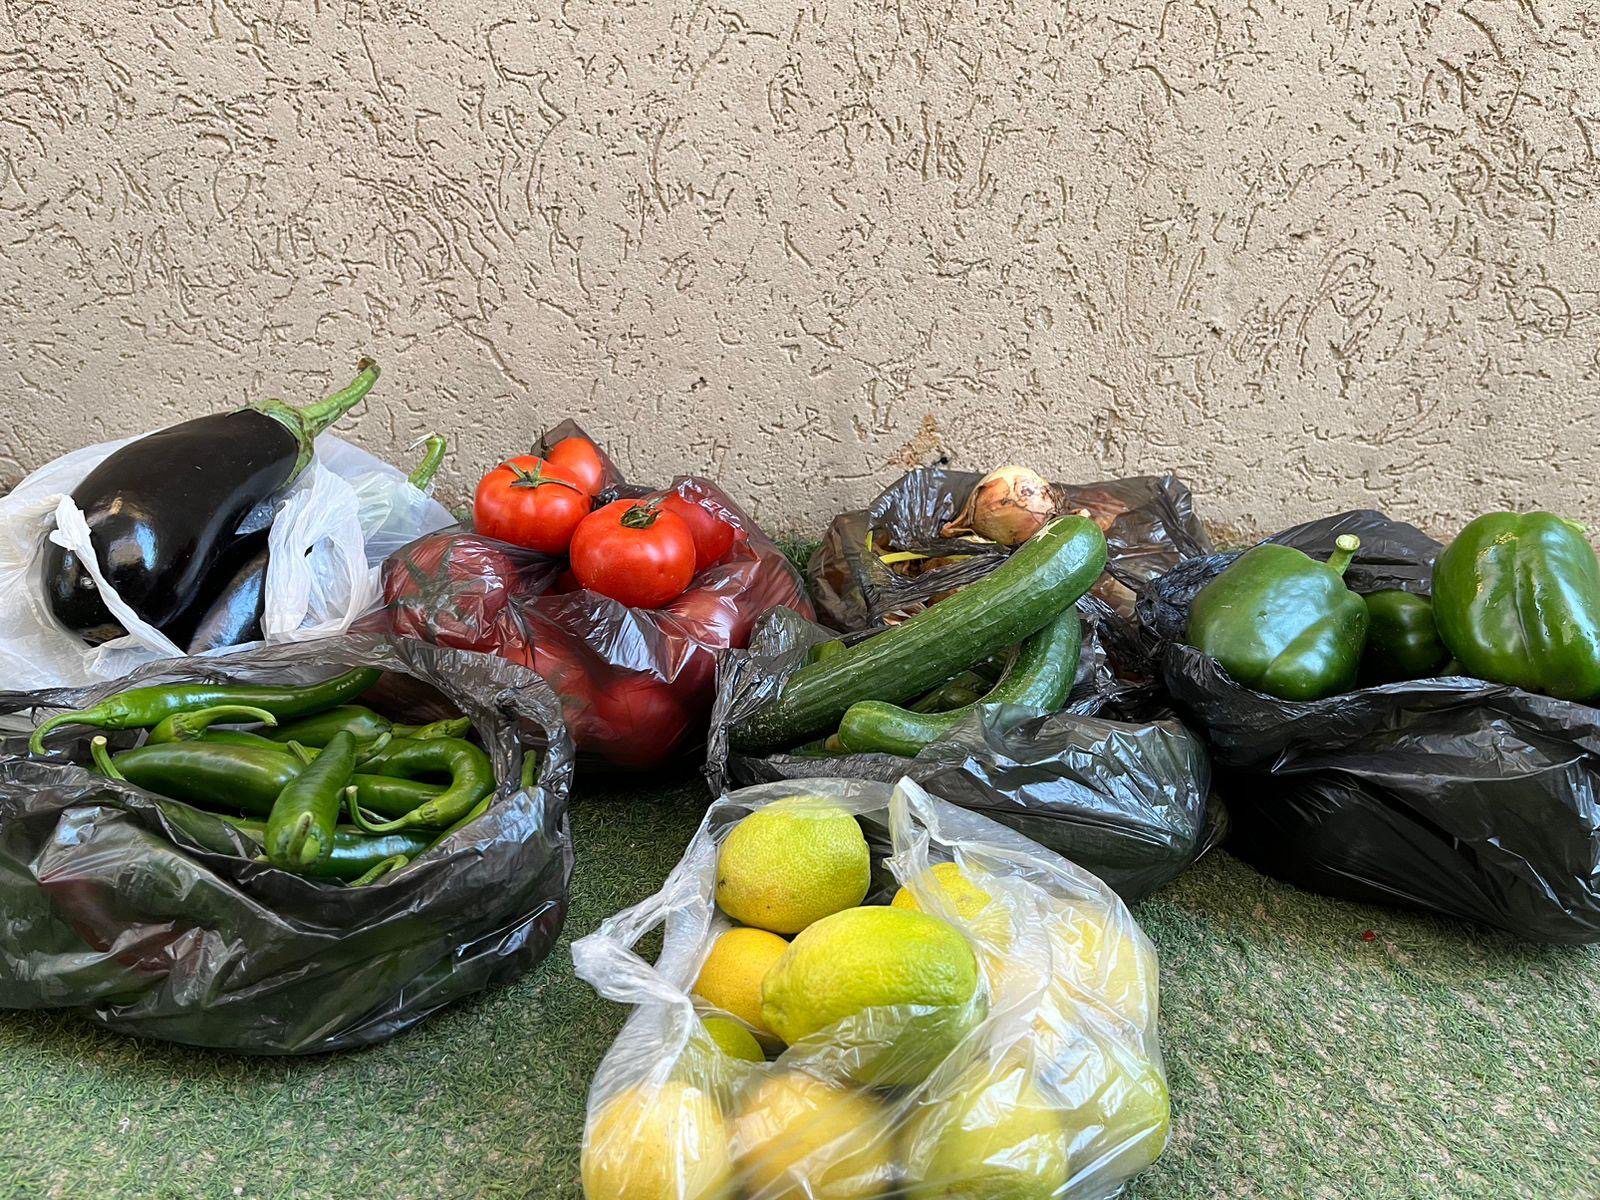 Bags of eggplant, tomatoes, peppers, and lemons